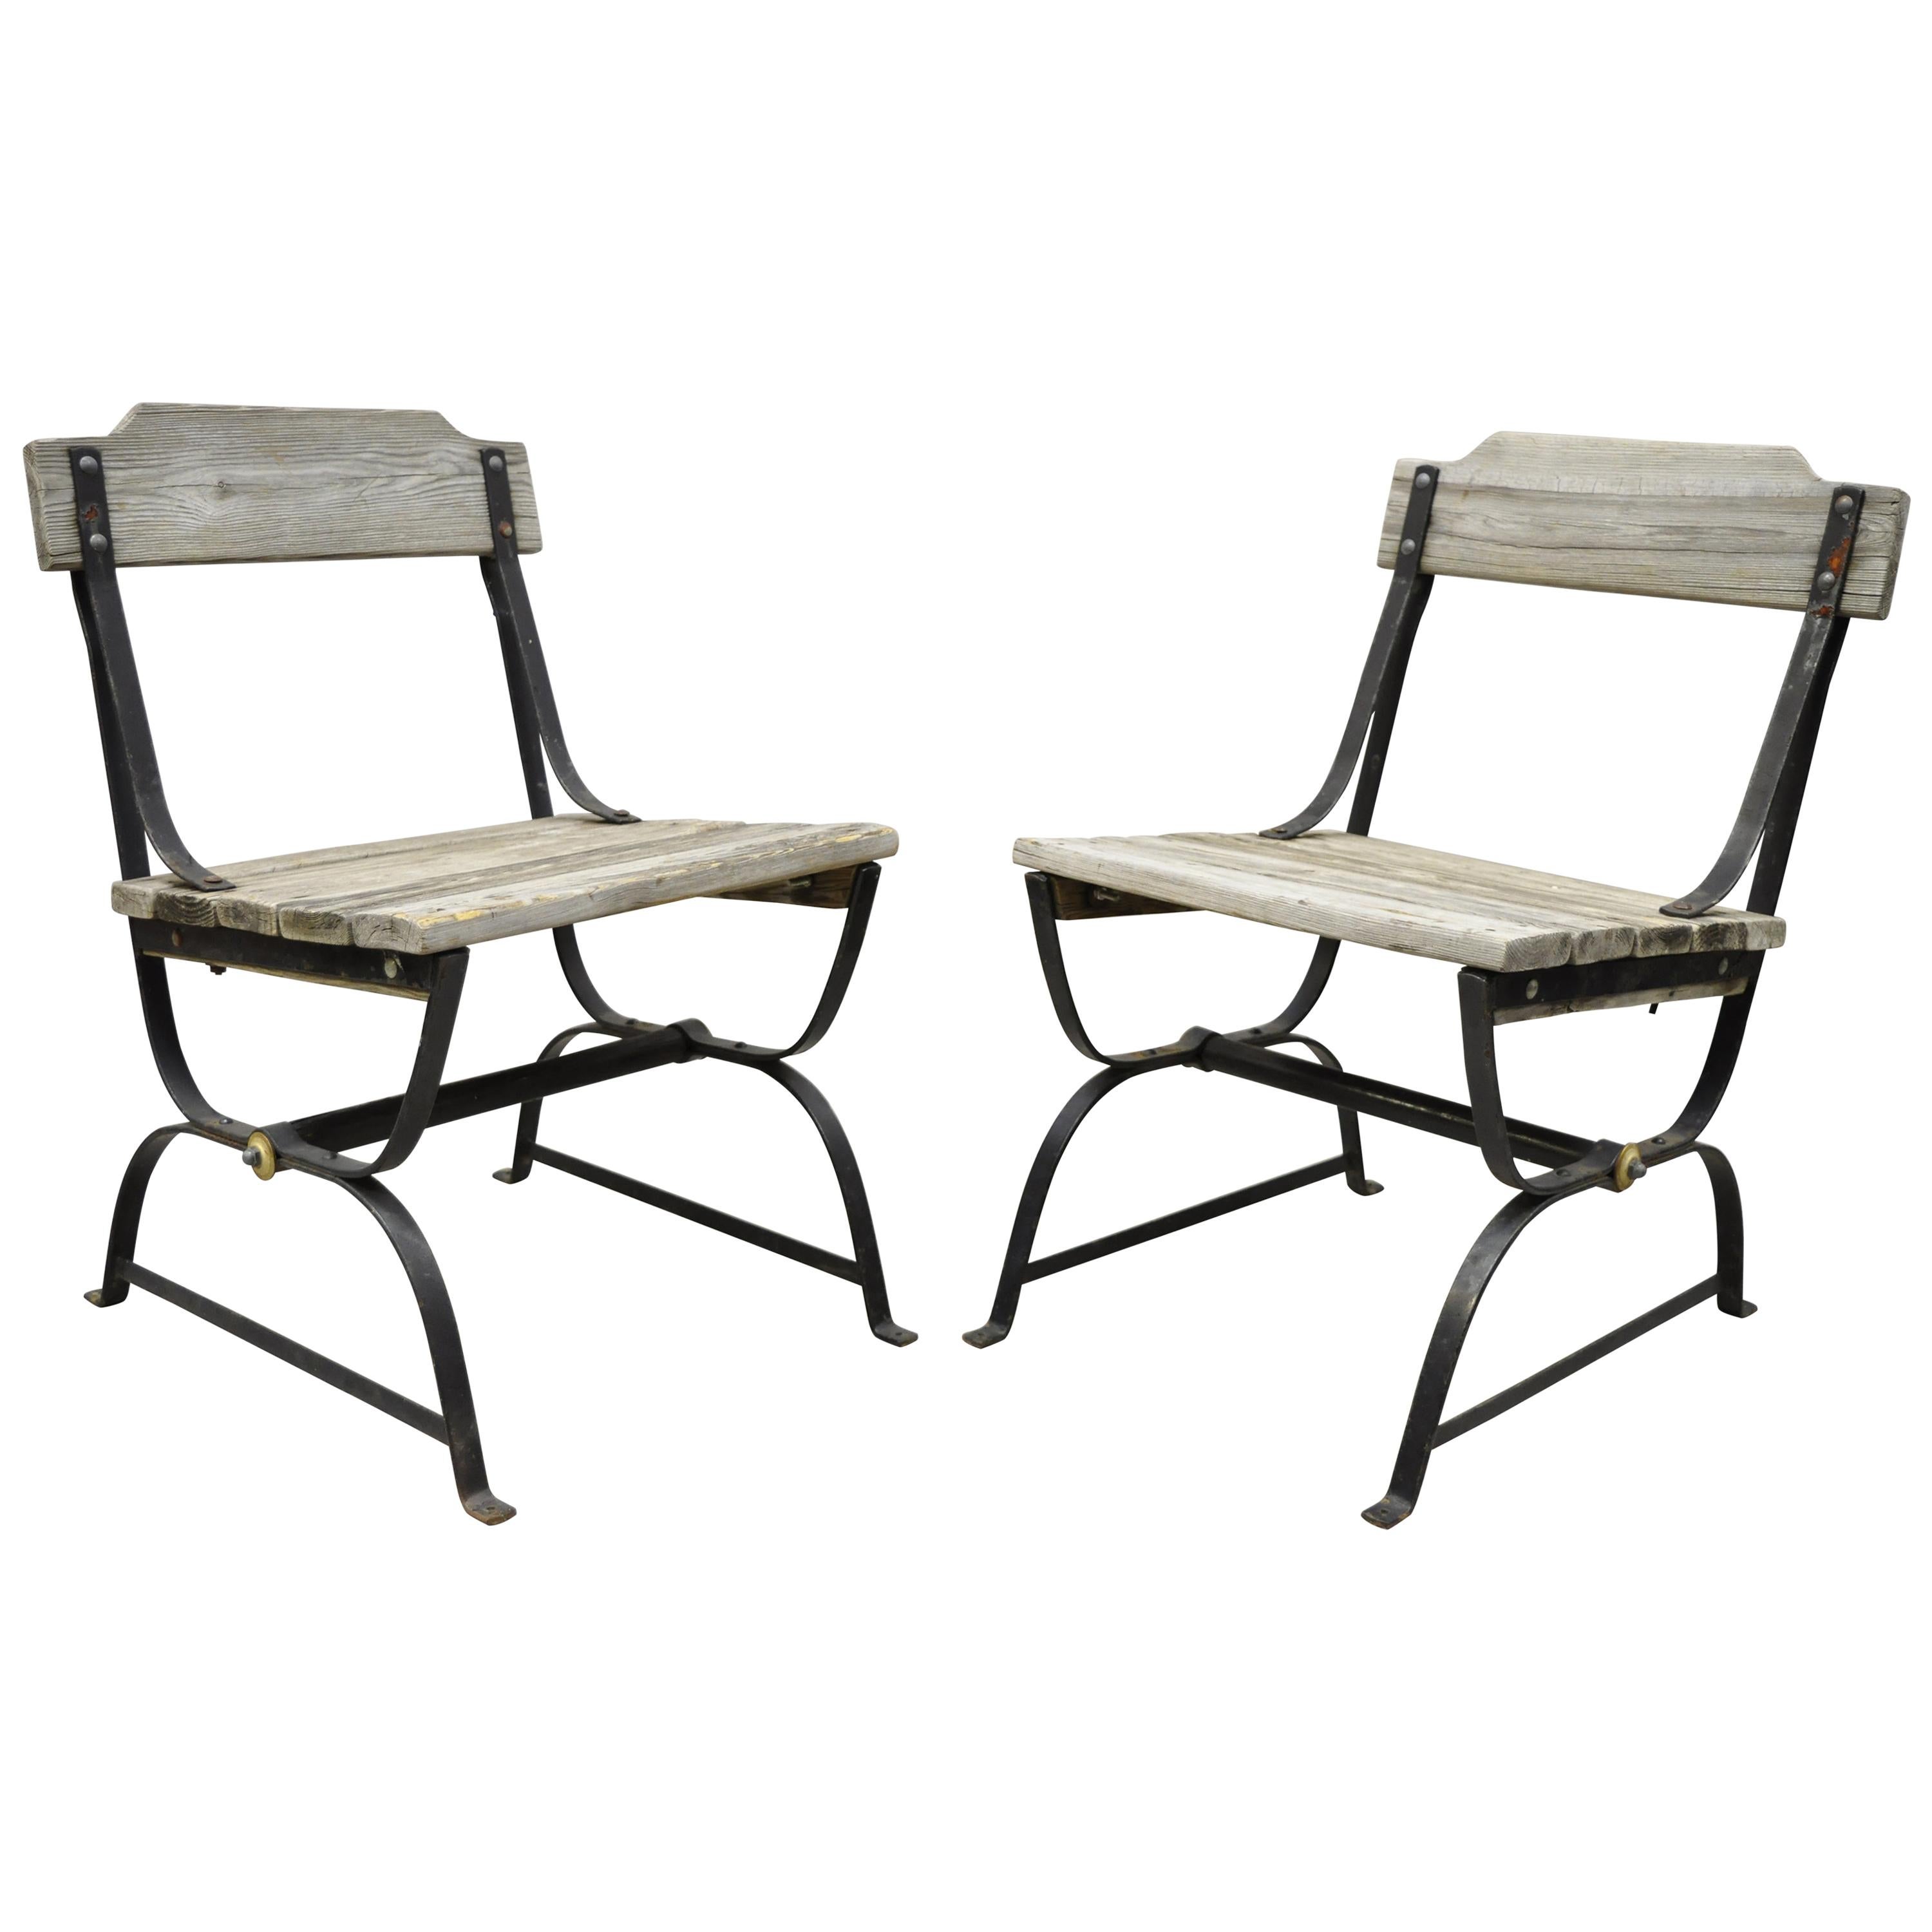 Antique French Industrial Wrought Iron Wooden Slat Seat Side Chairs, a Pair For Sale